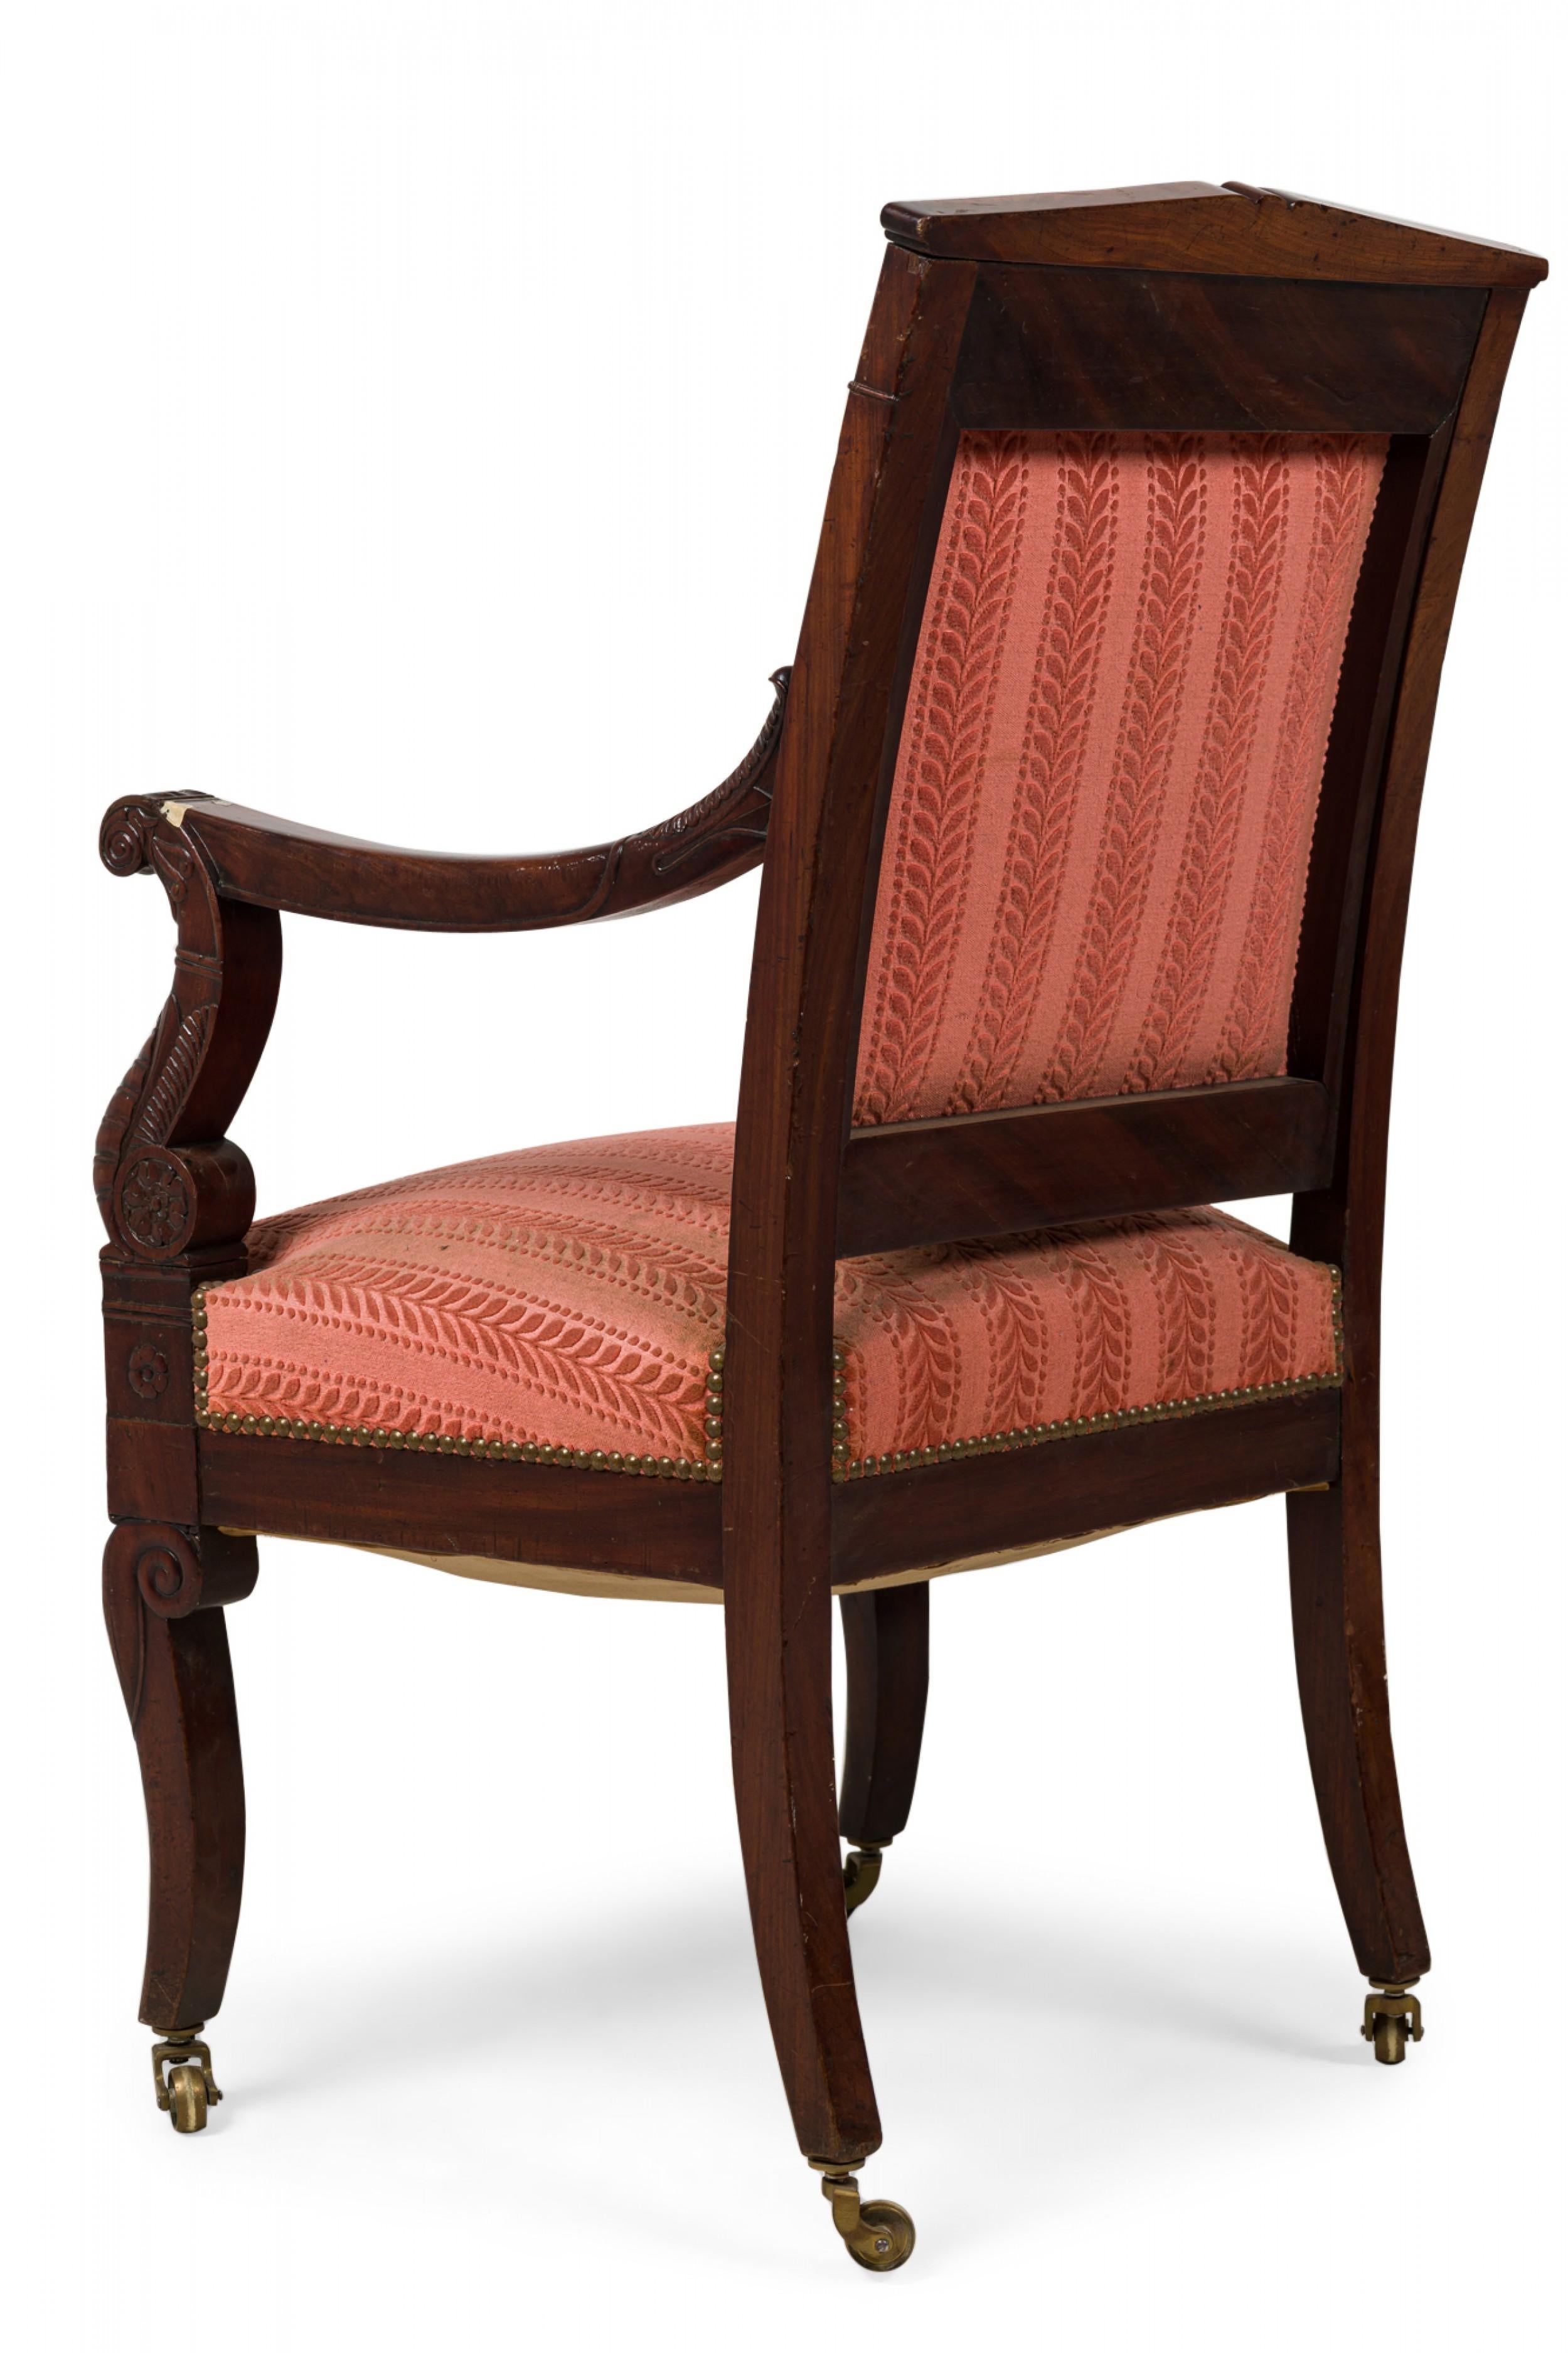 French Empire Armchair with Red Floral Striped Damask Upholstery In Good Condition For Sale In New York, NY